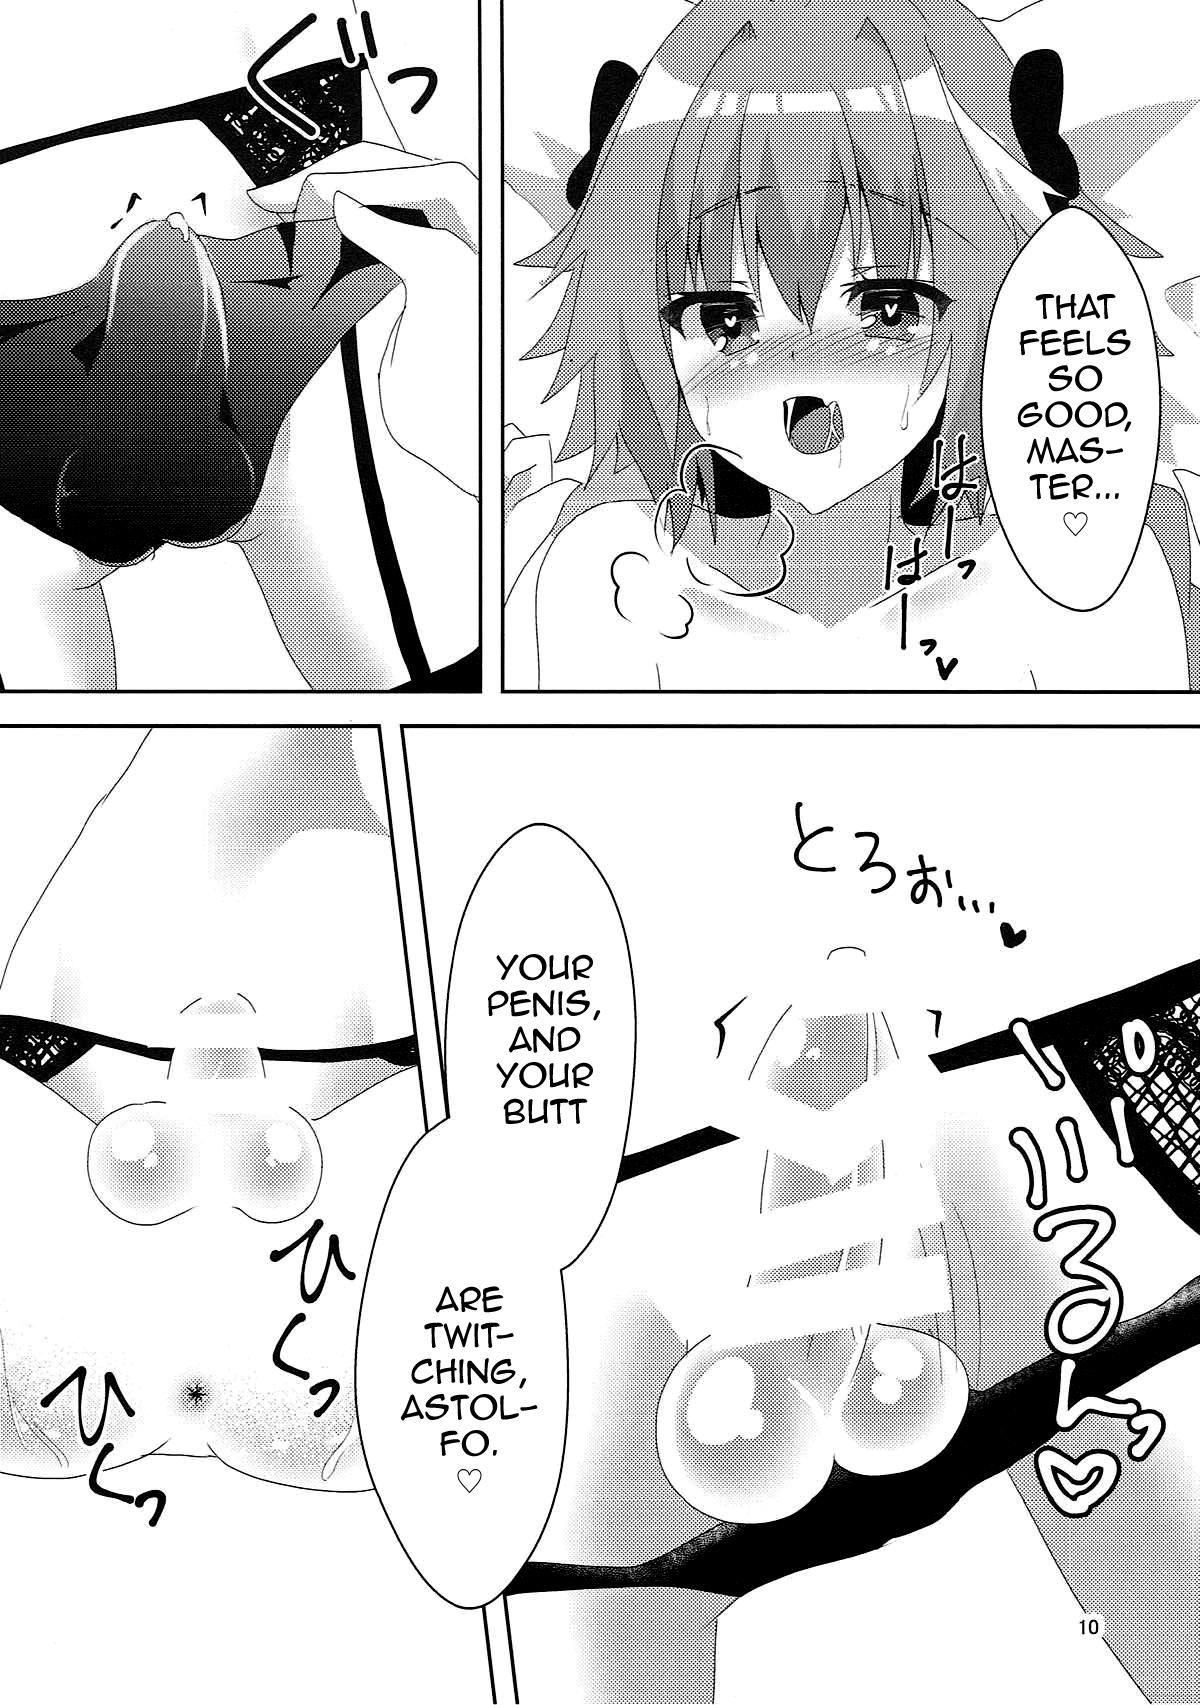 Teen Blowjob AstolfHeart - Fate grand order Storyline - Page 10